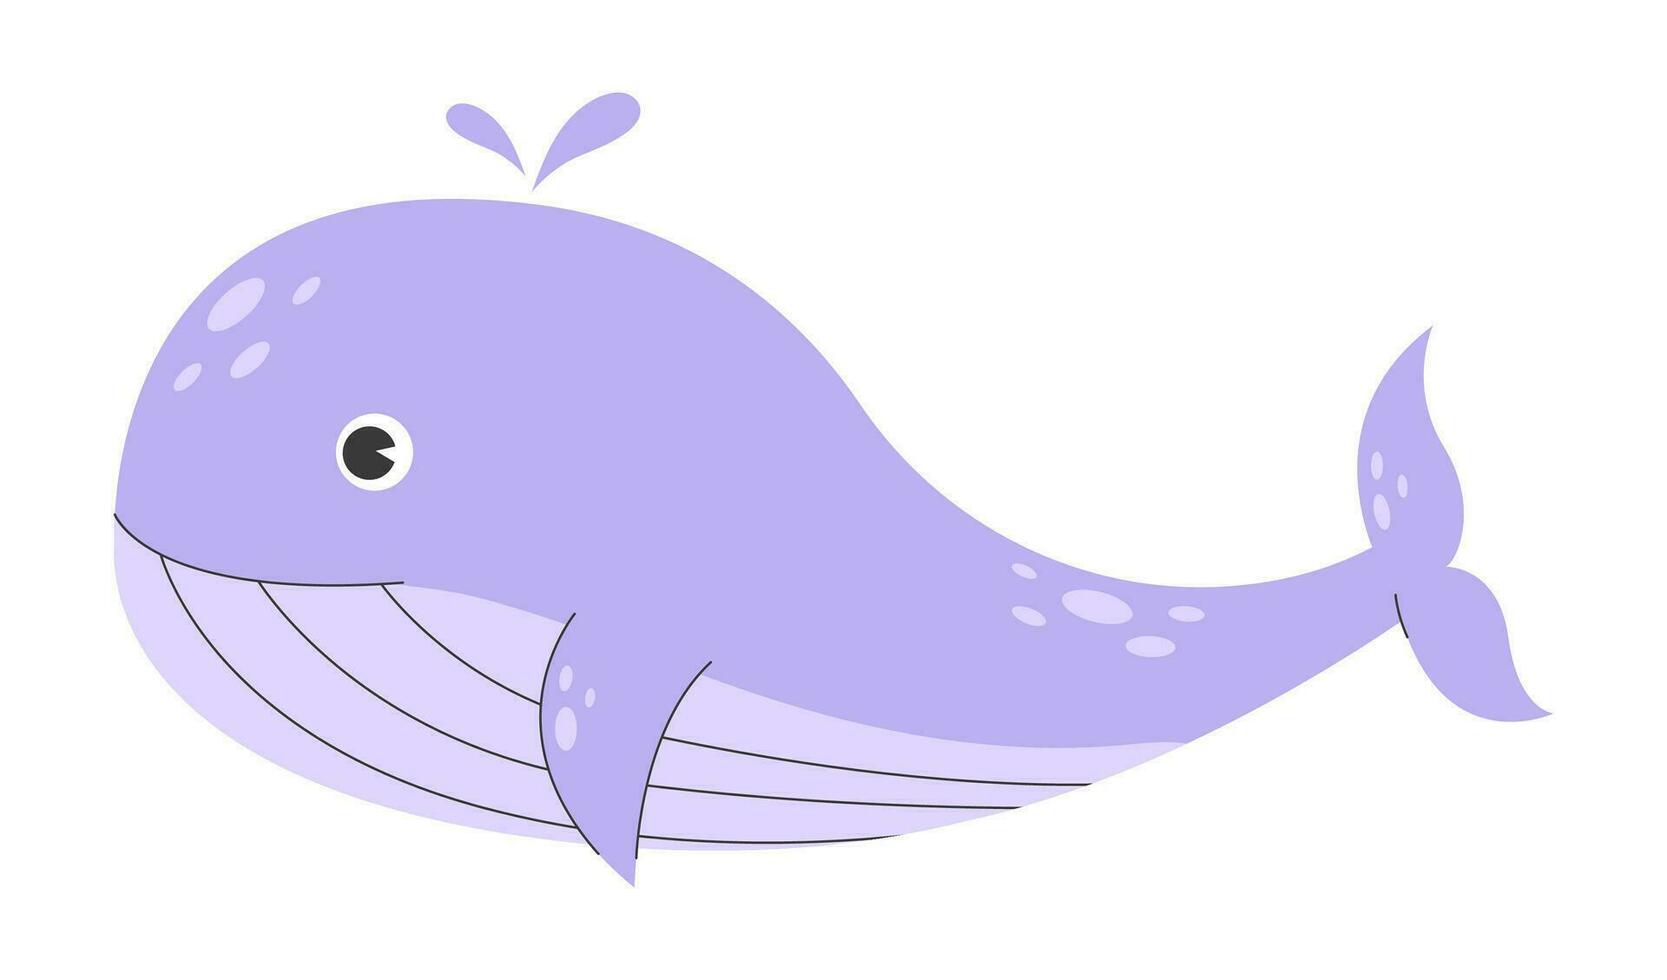 Cute purple whale swimming in sea or ocean. Giant underwater animal. Poster with cute marine purple whale. Childish colored flat vector illustration isolated on white.